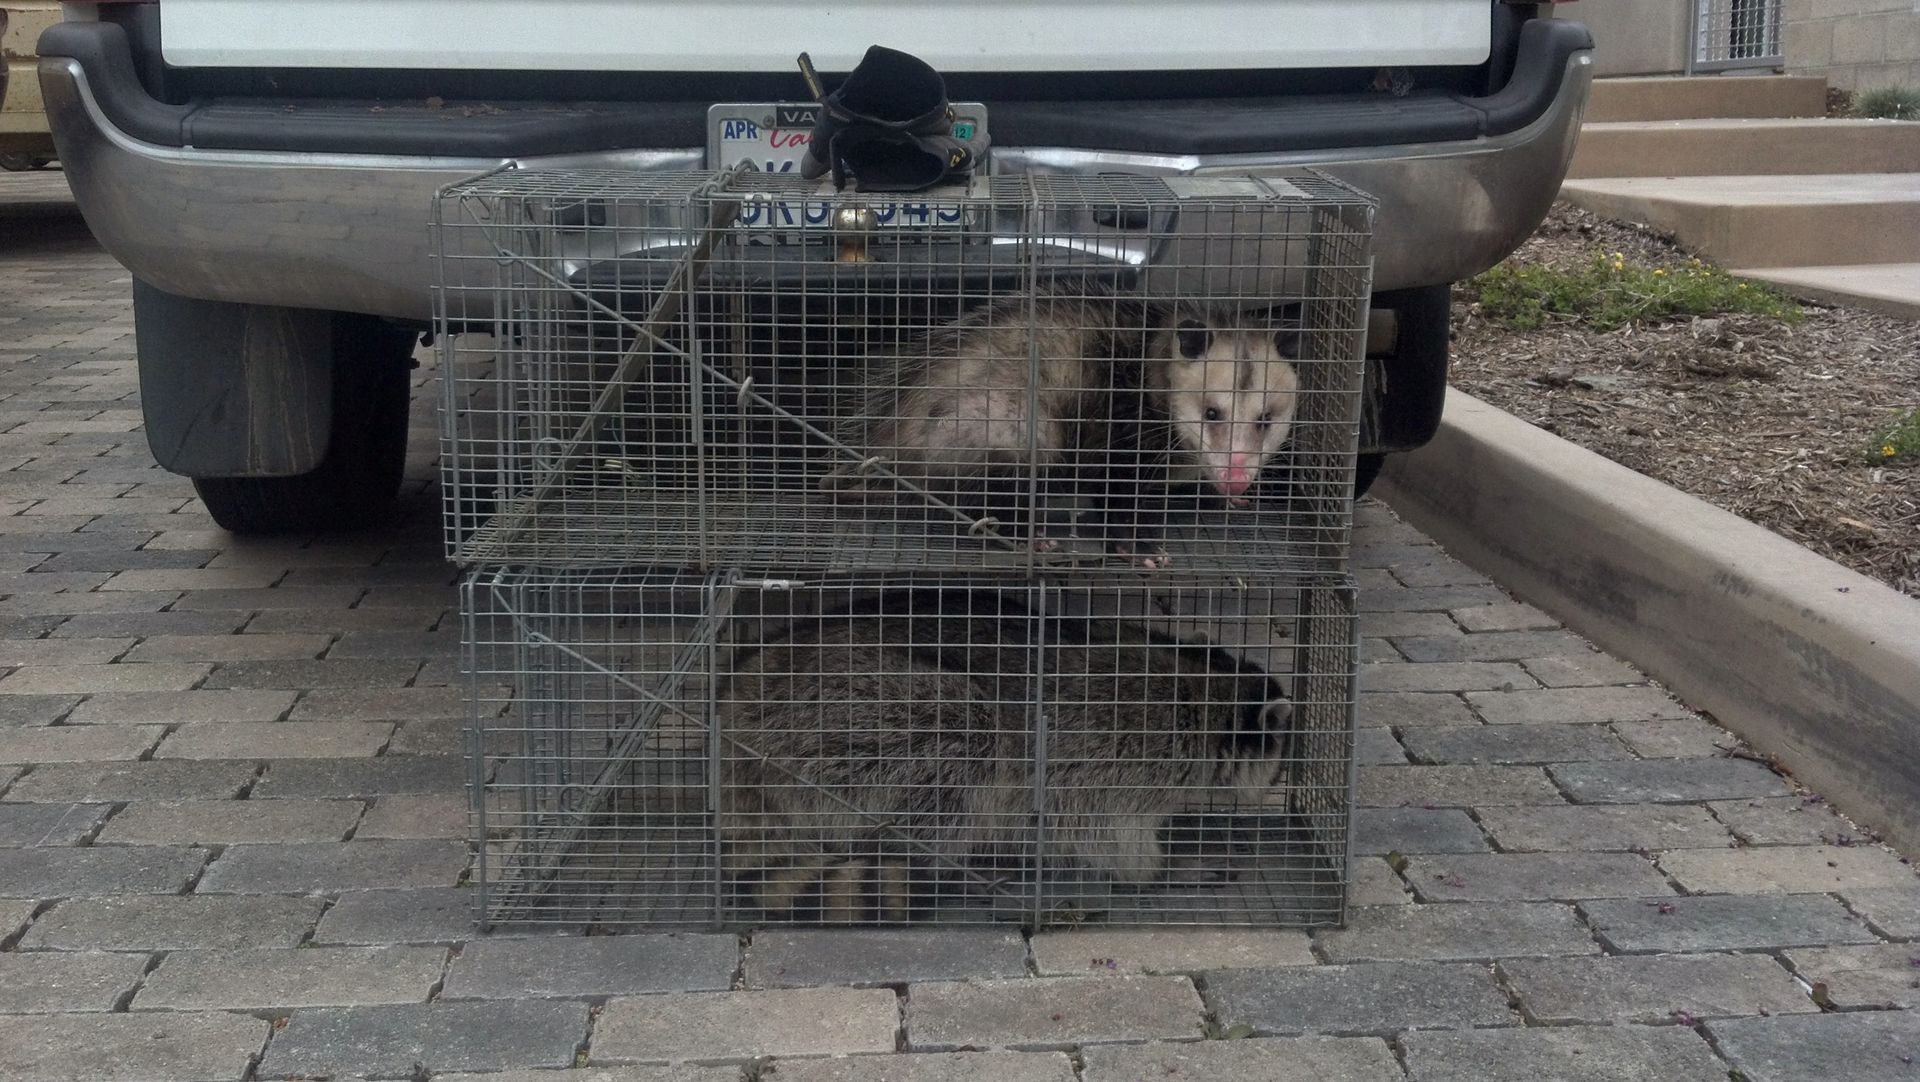 Two opossums are in a cage behind a car